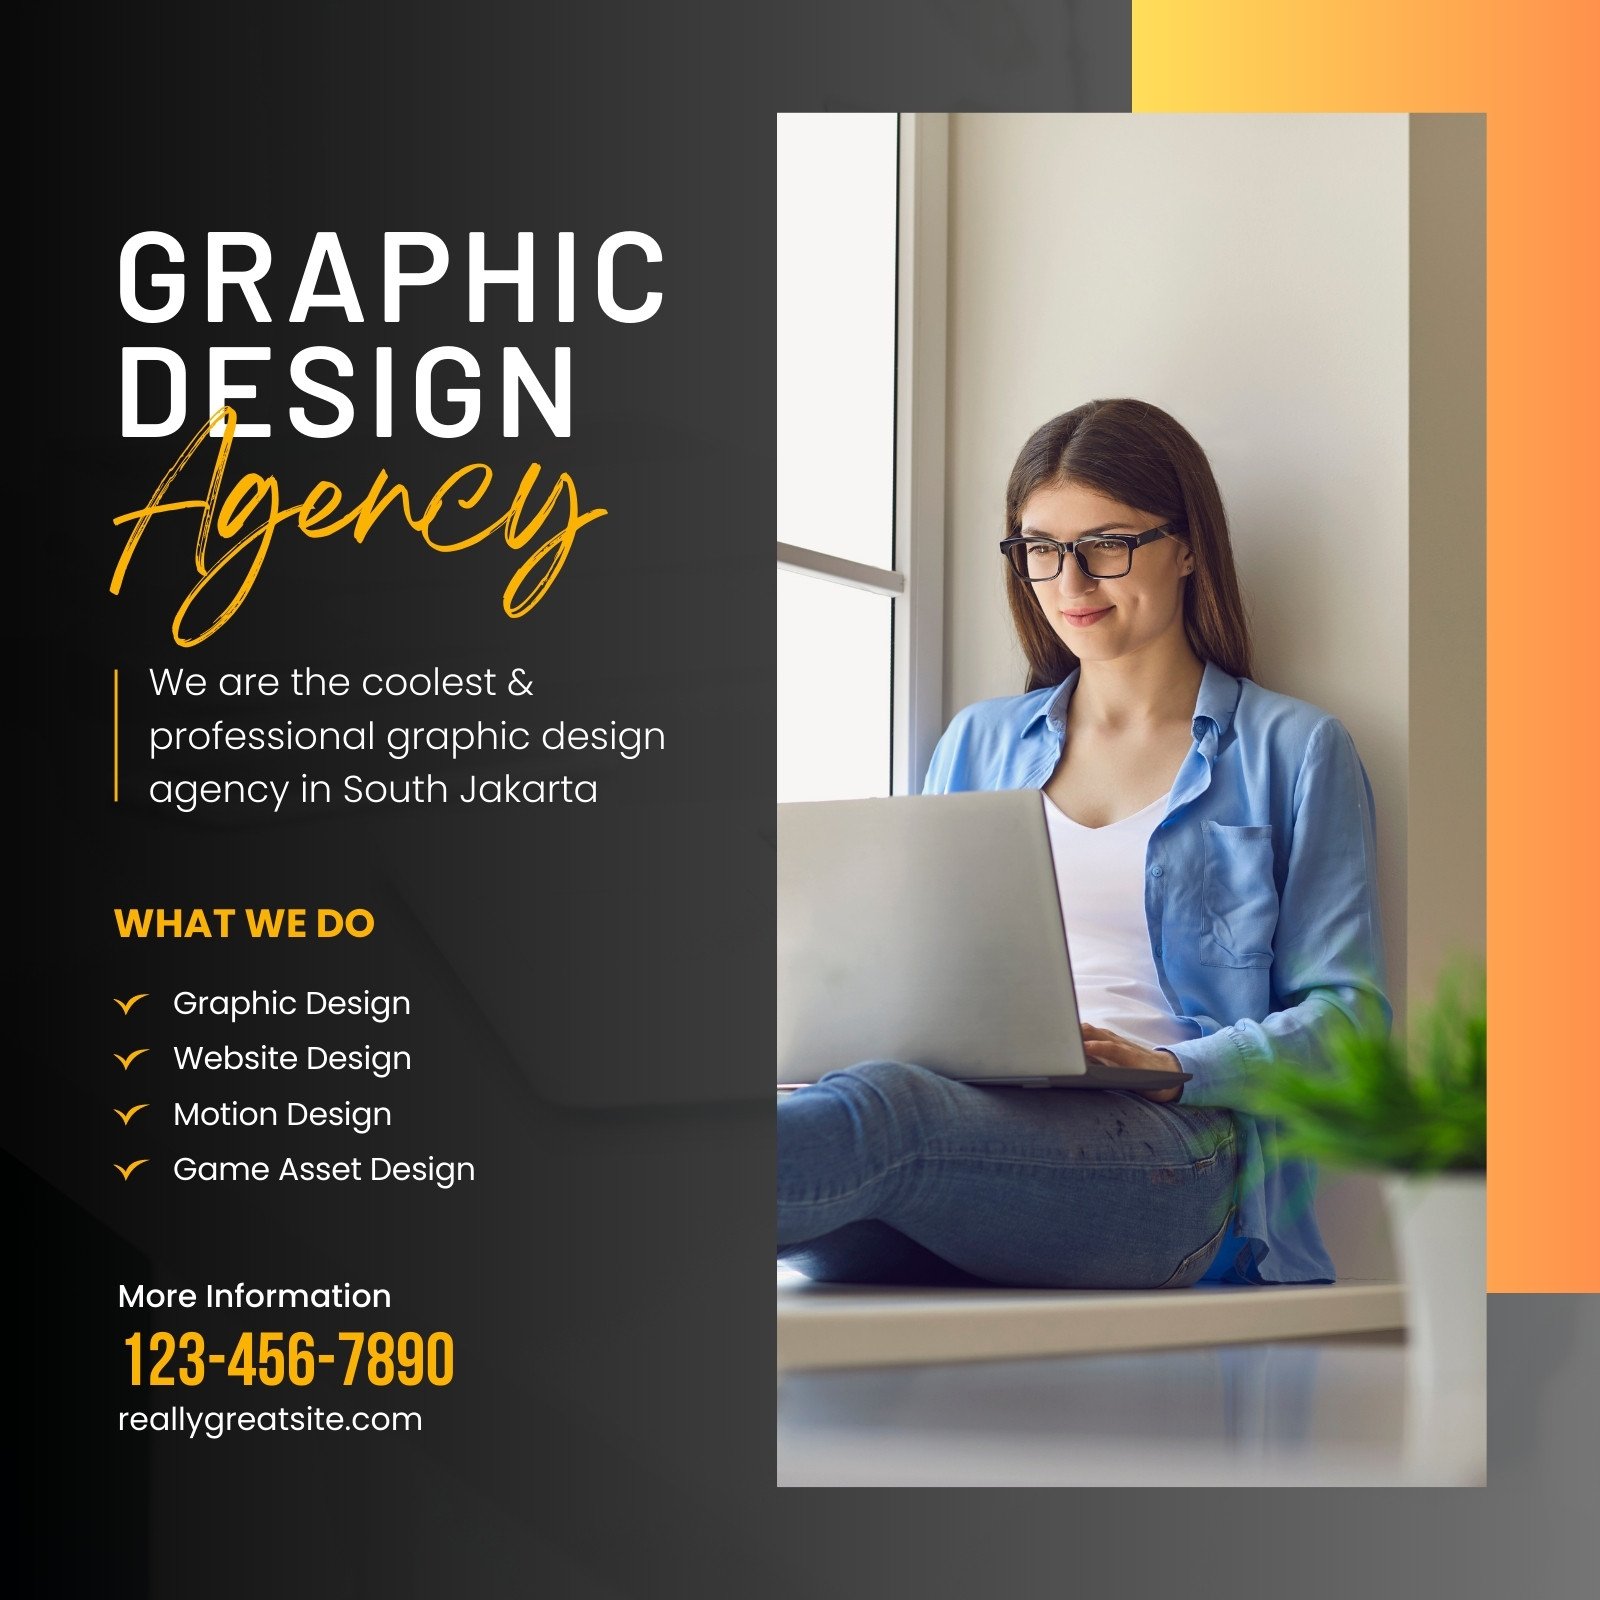 Graphic Design Tools designs, themes, templates and downloadable